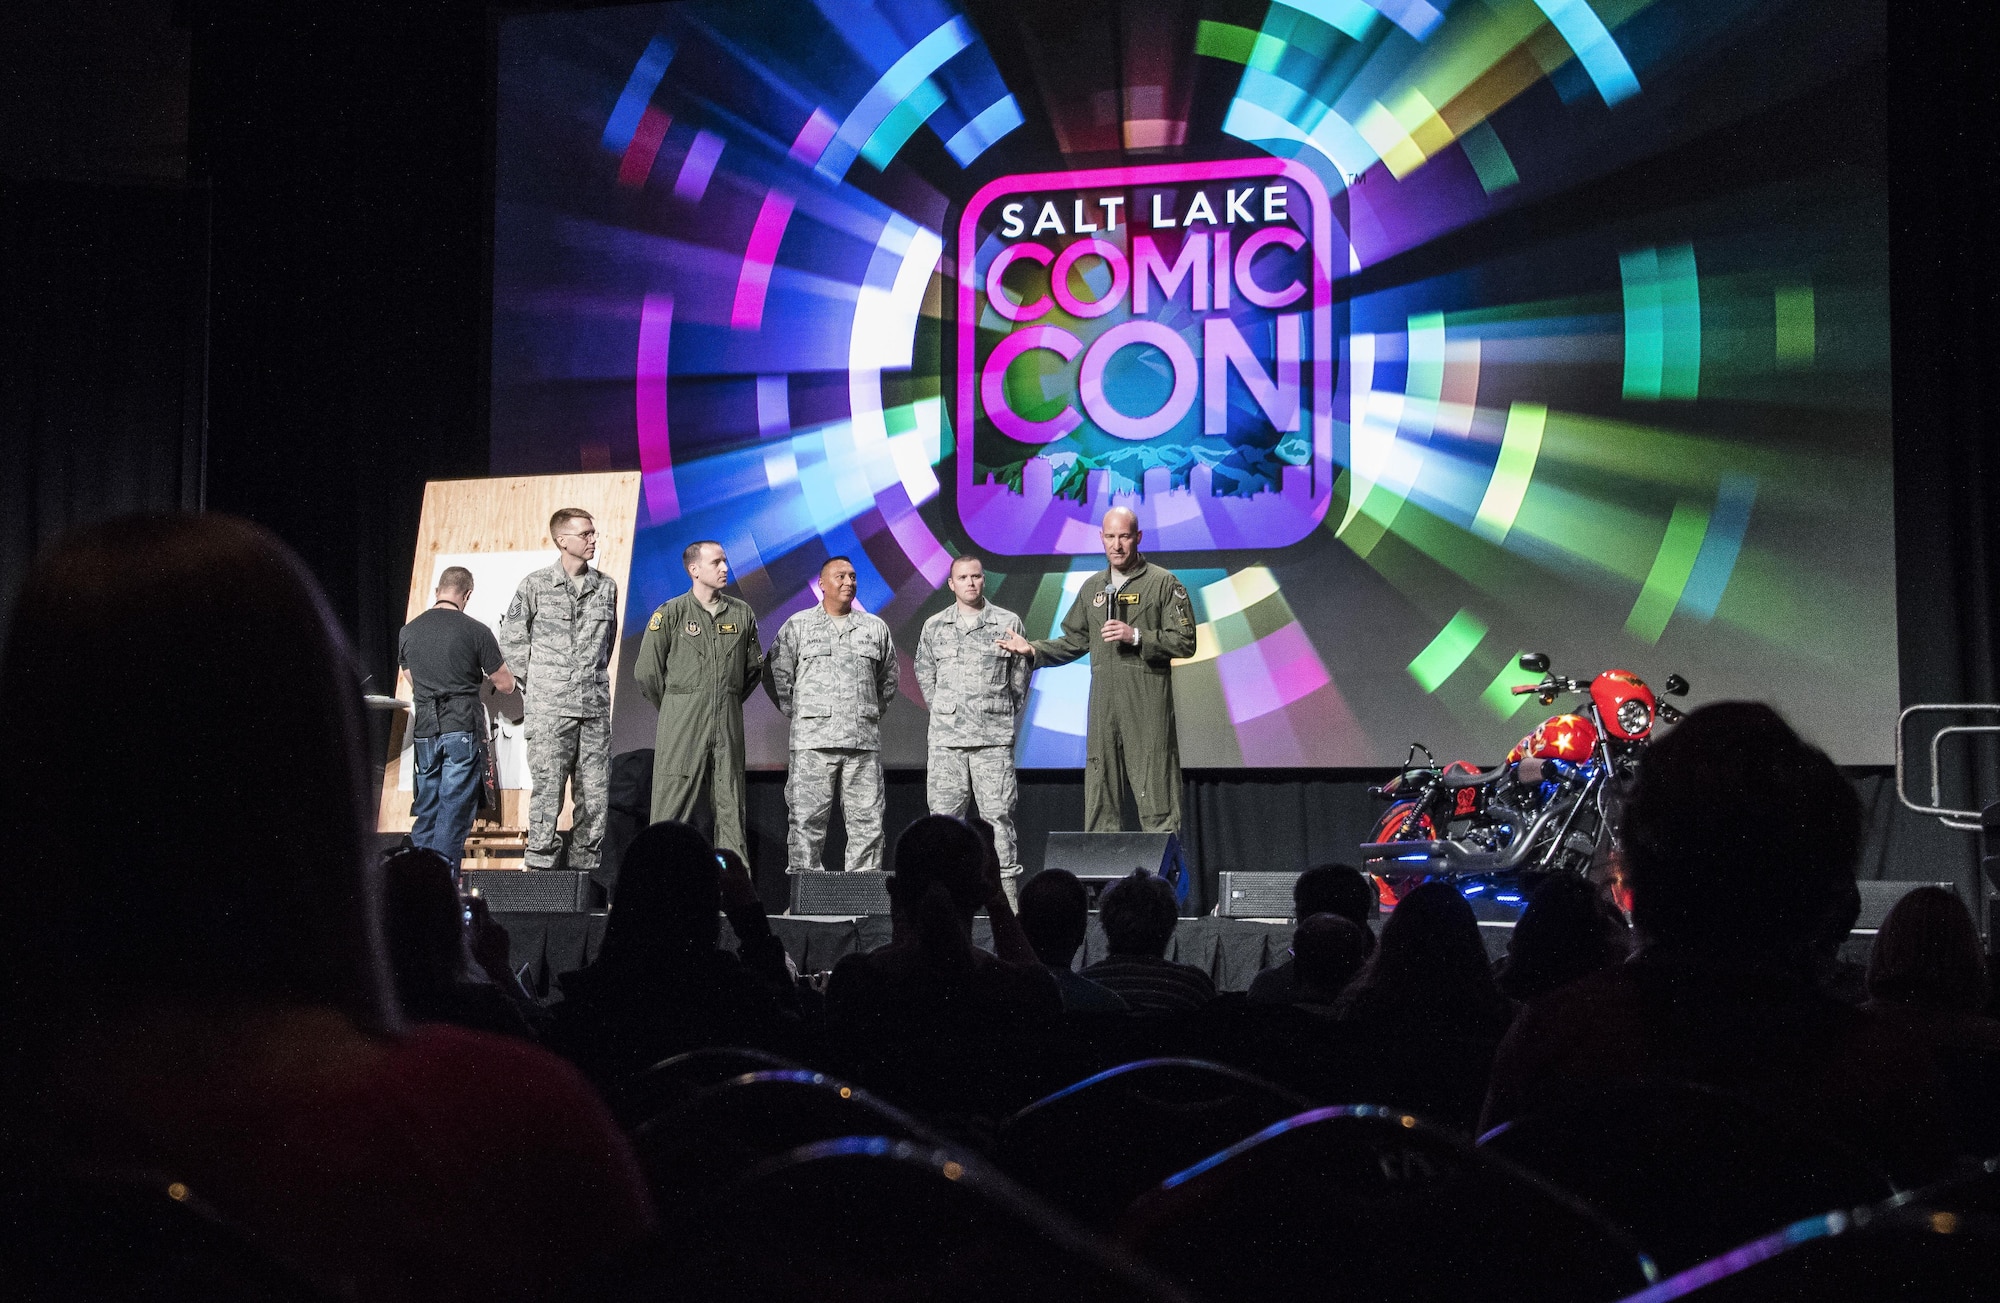 Lt. Col. Mathew Miller, 419th Operations Support Flight commander, gives introductory remarks during a press conference at Salt Lake Comic Con